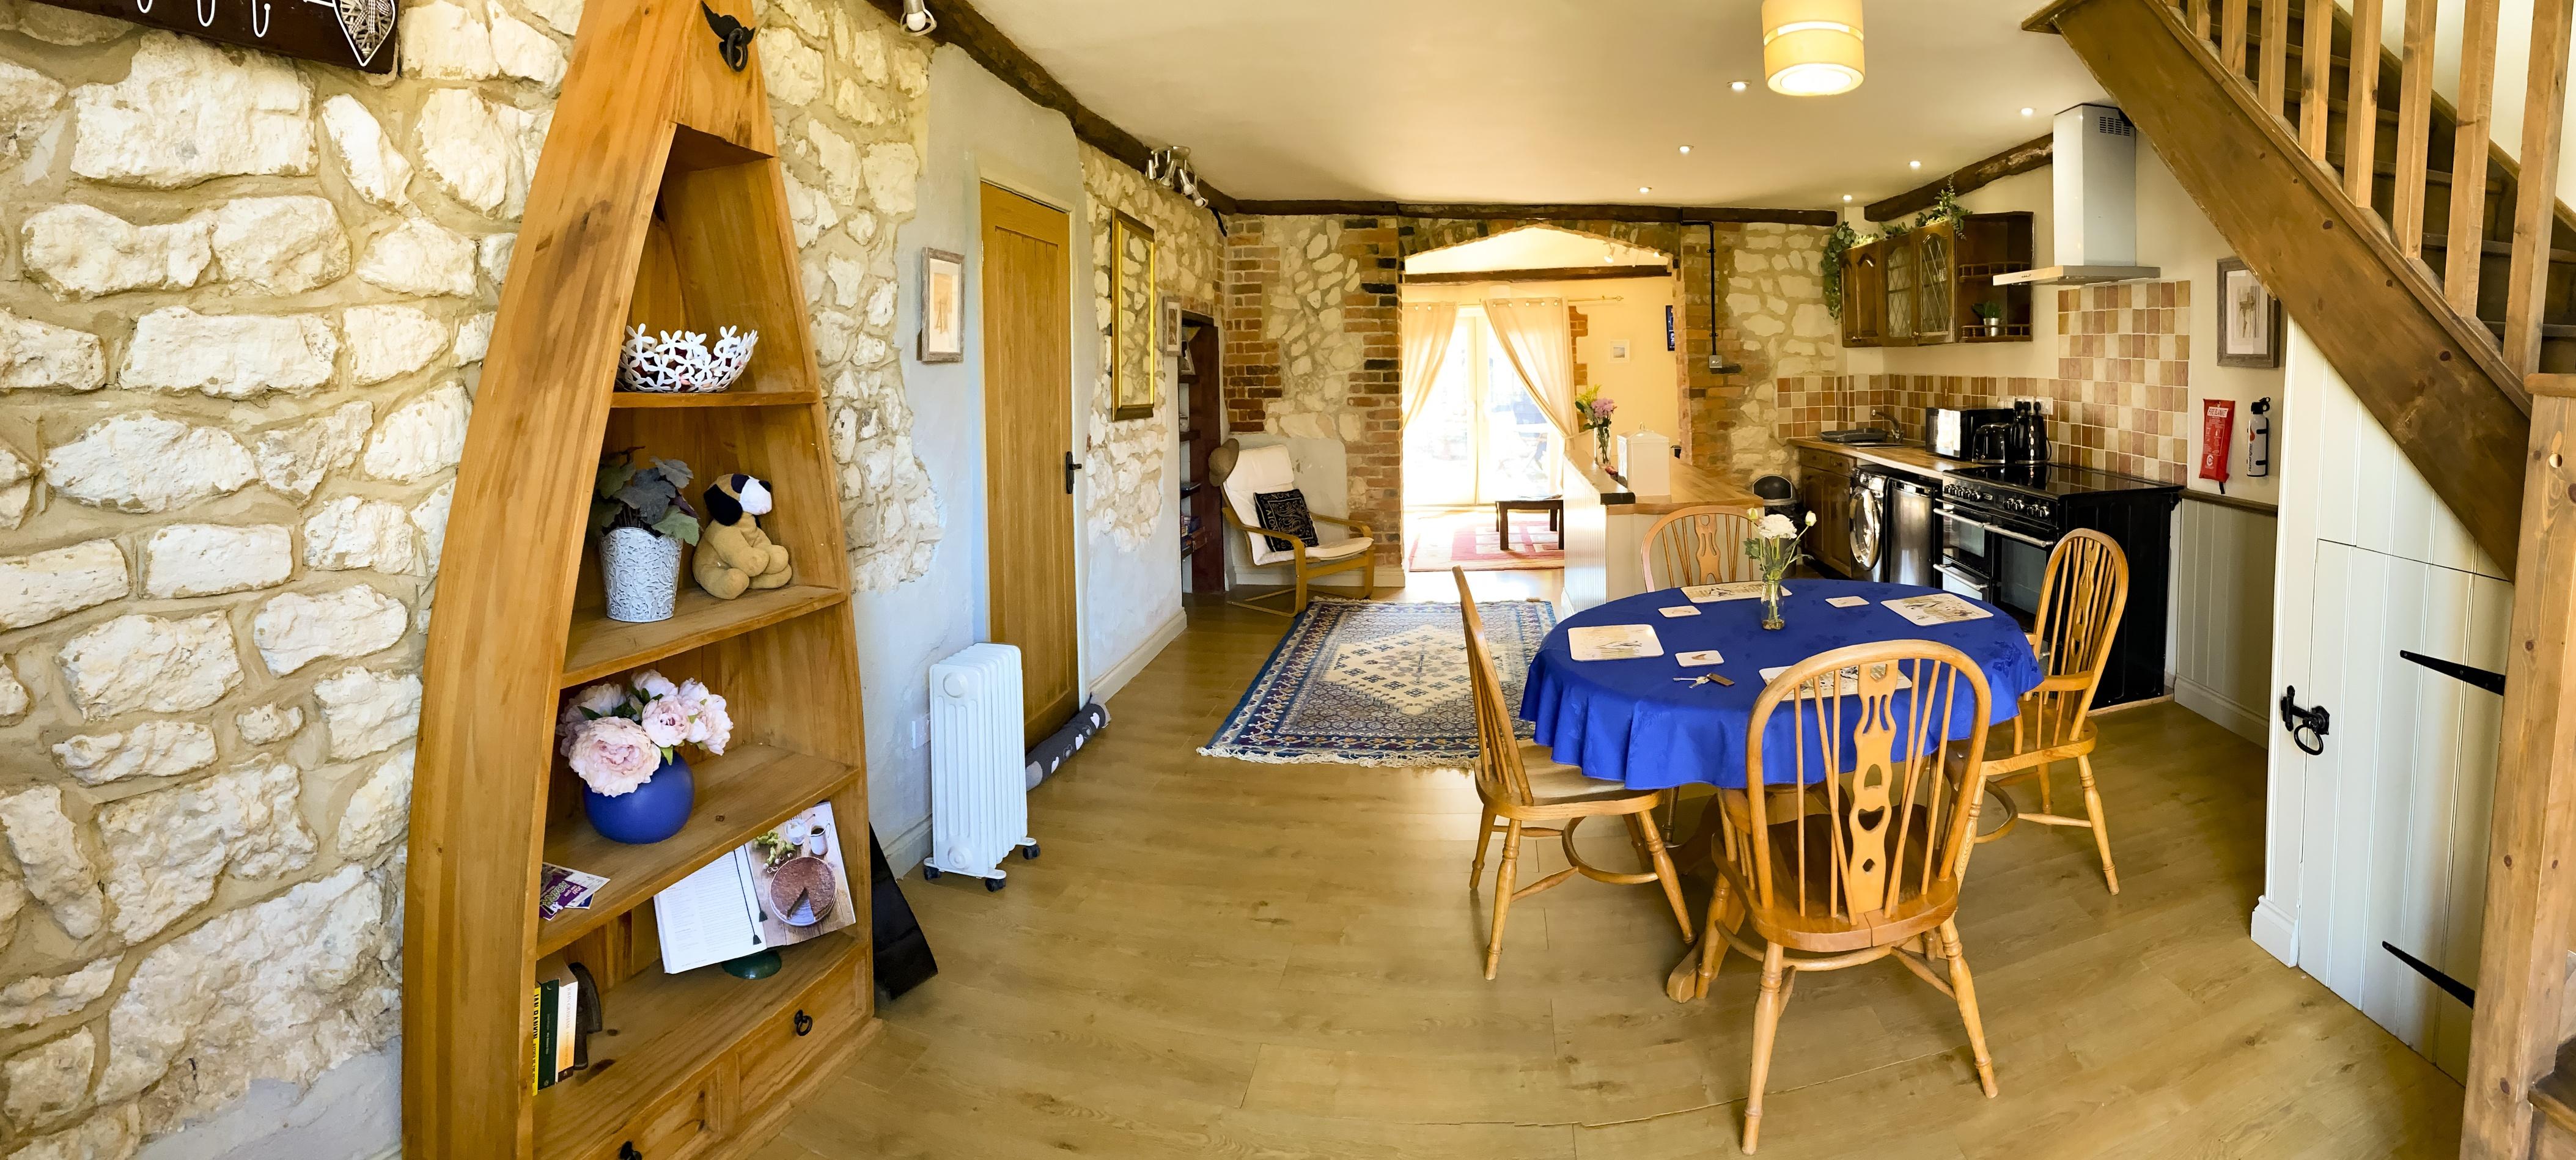 NORFOLK HOLIDAY ACCOMMODATION COTTAGE & ANNEX: 'THE BARN' & 'THE CHURNERY'